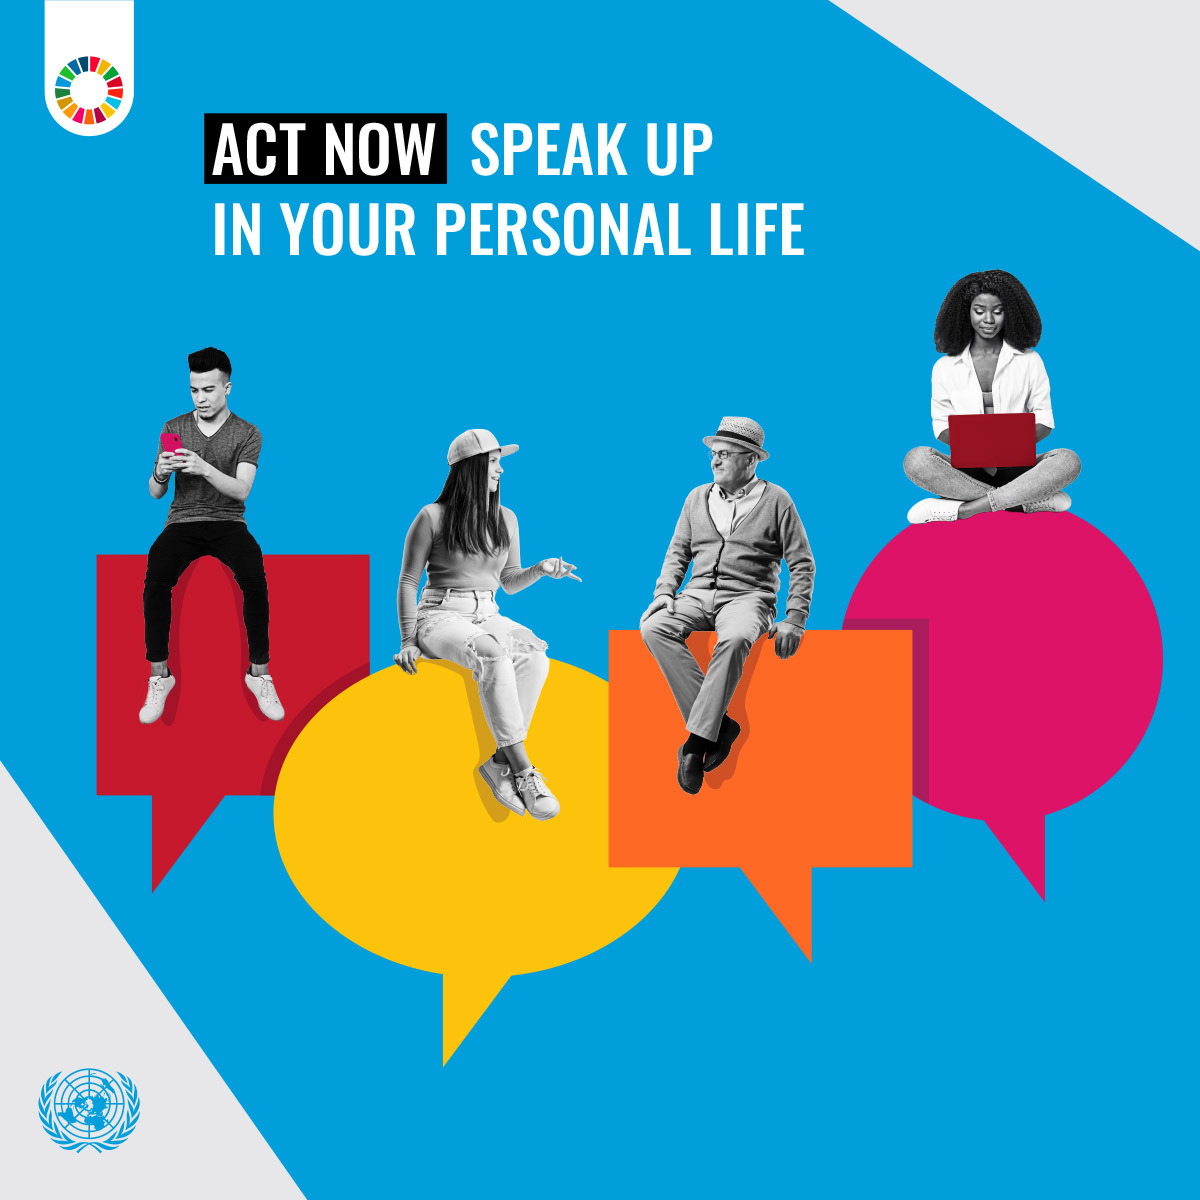 ActNow and be a catalyst for change! Together, we can shape our #OurCommonFuture by challenging discriminatory language and behavior. Join the movement ahead of the Summit of the Future🌎 ➡️ bit.ly/SoF24-SpeakUp